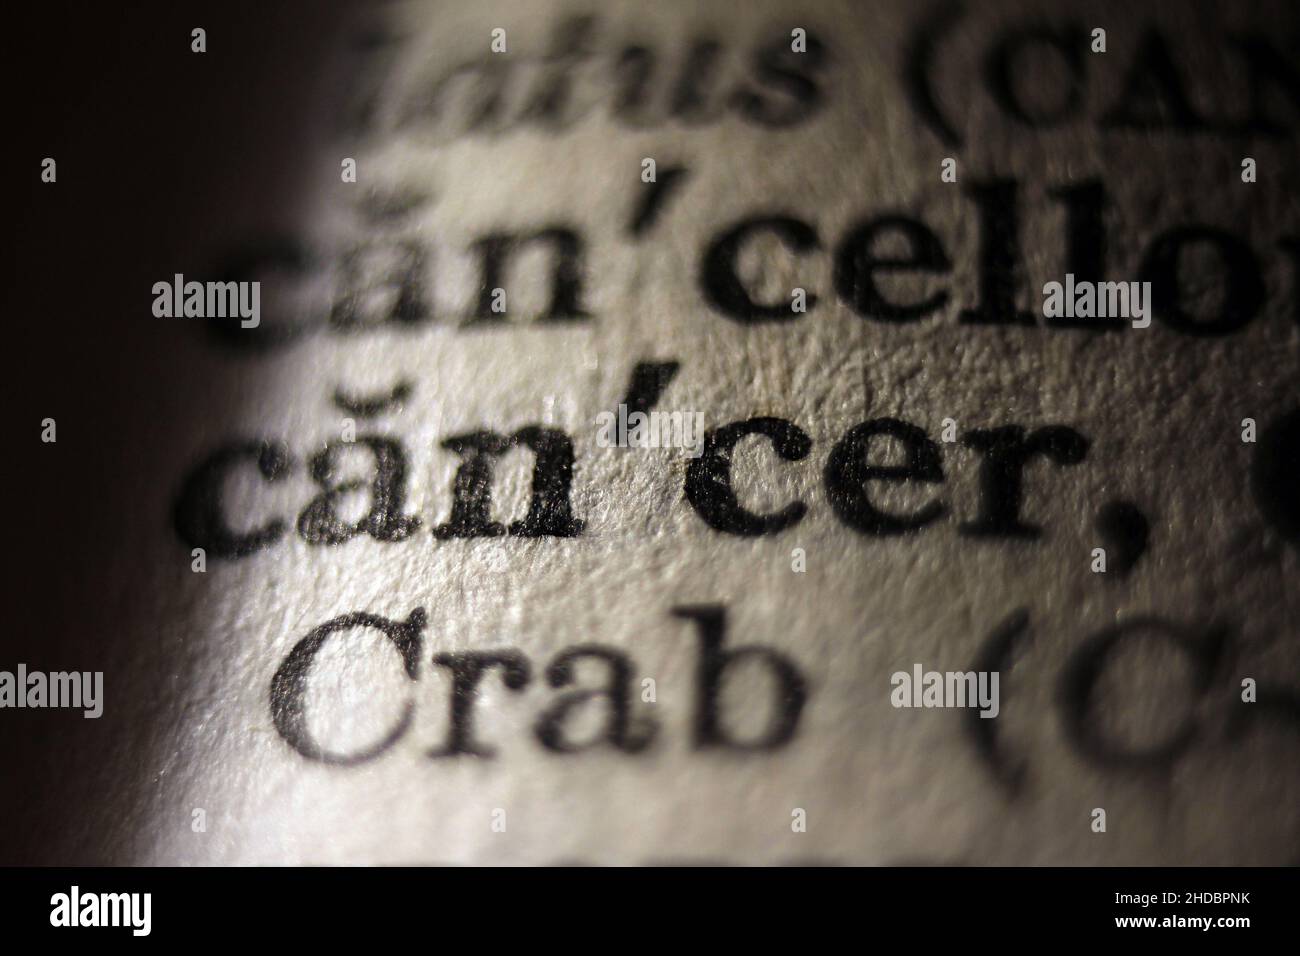 Word 'cancer' printed on book page, macro close-up Stock Photo